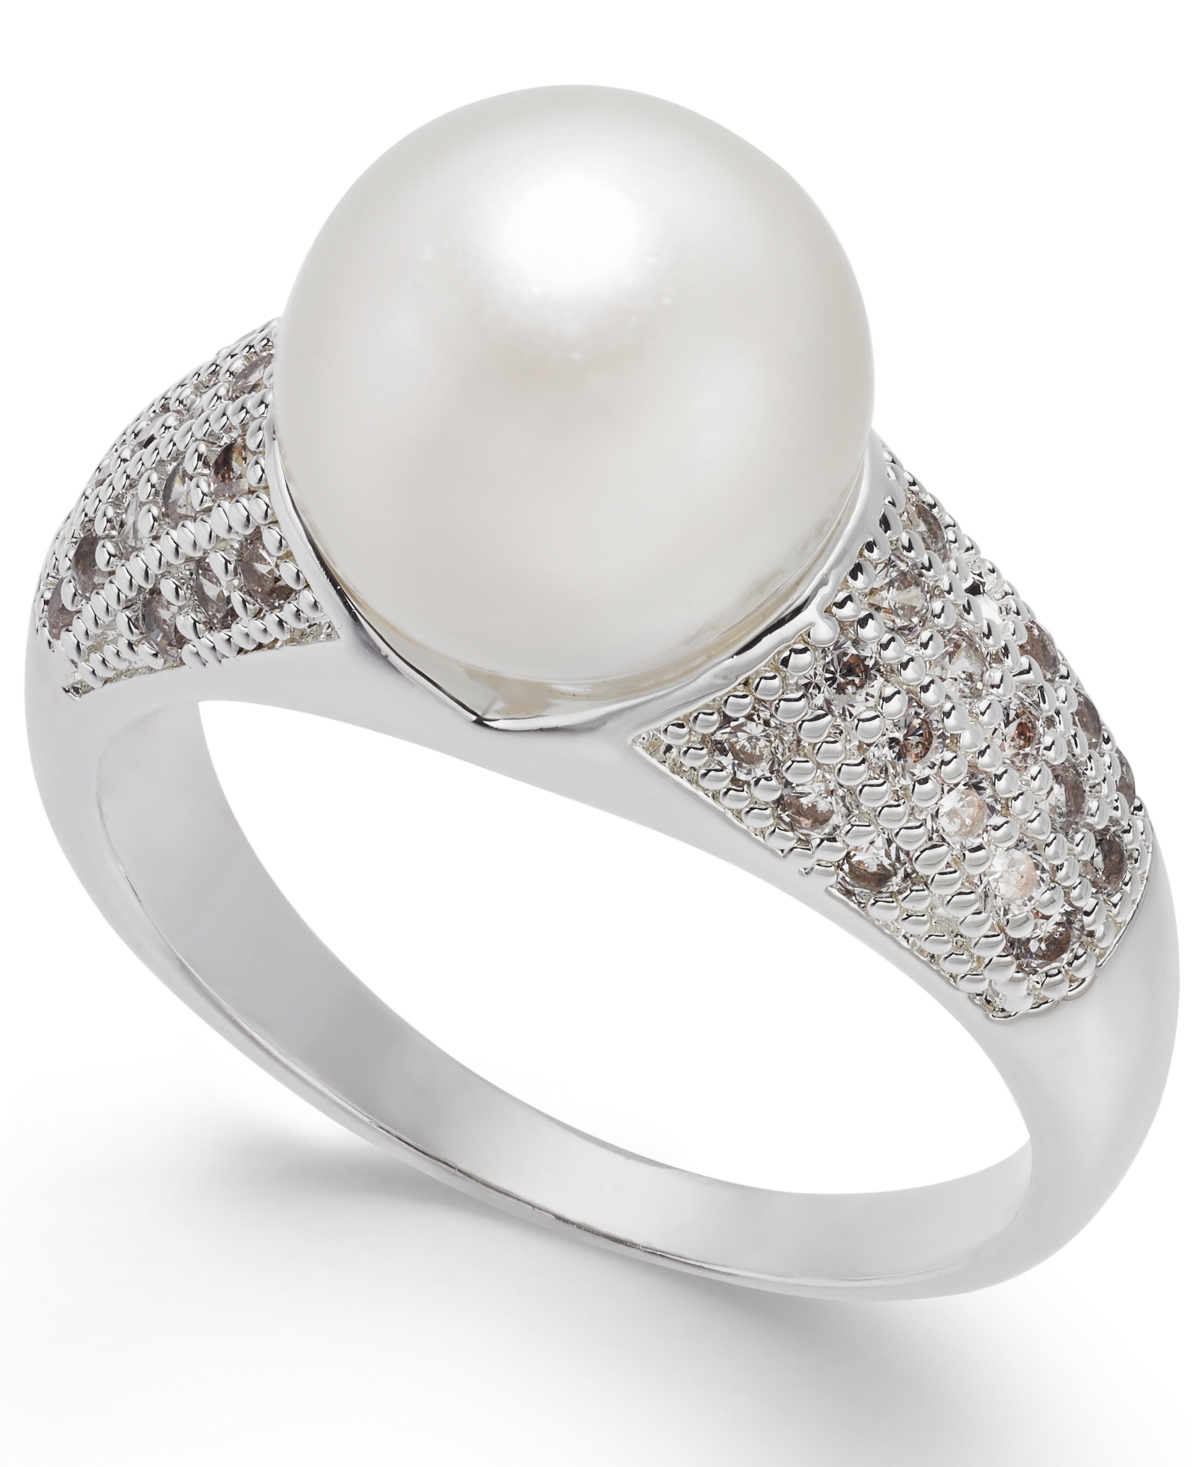 Fine Silver Plate Pave & Imitation Pearl Ring, Created for Macy's - Silver